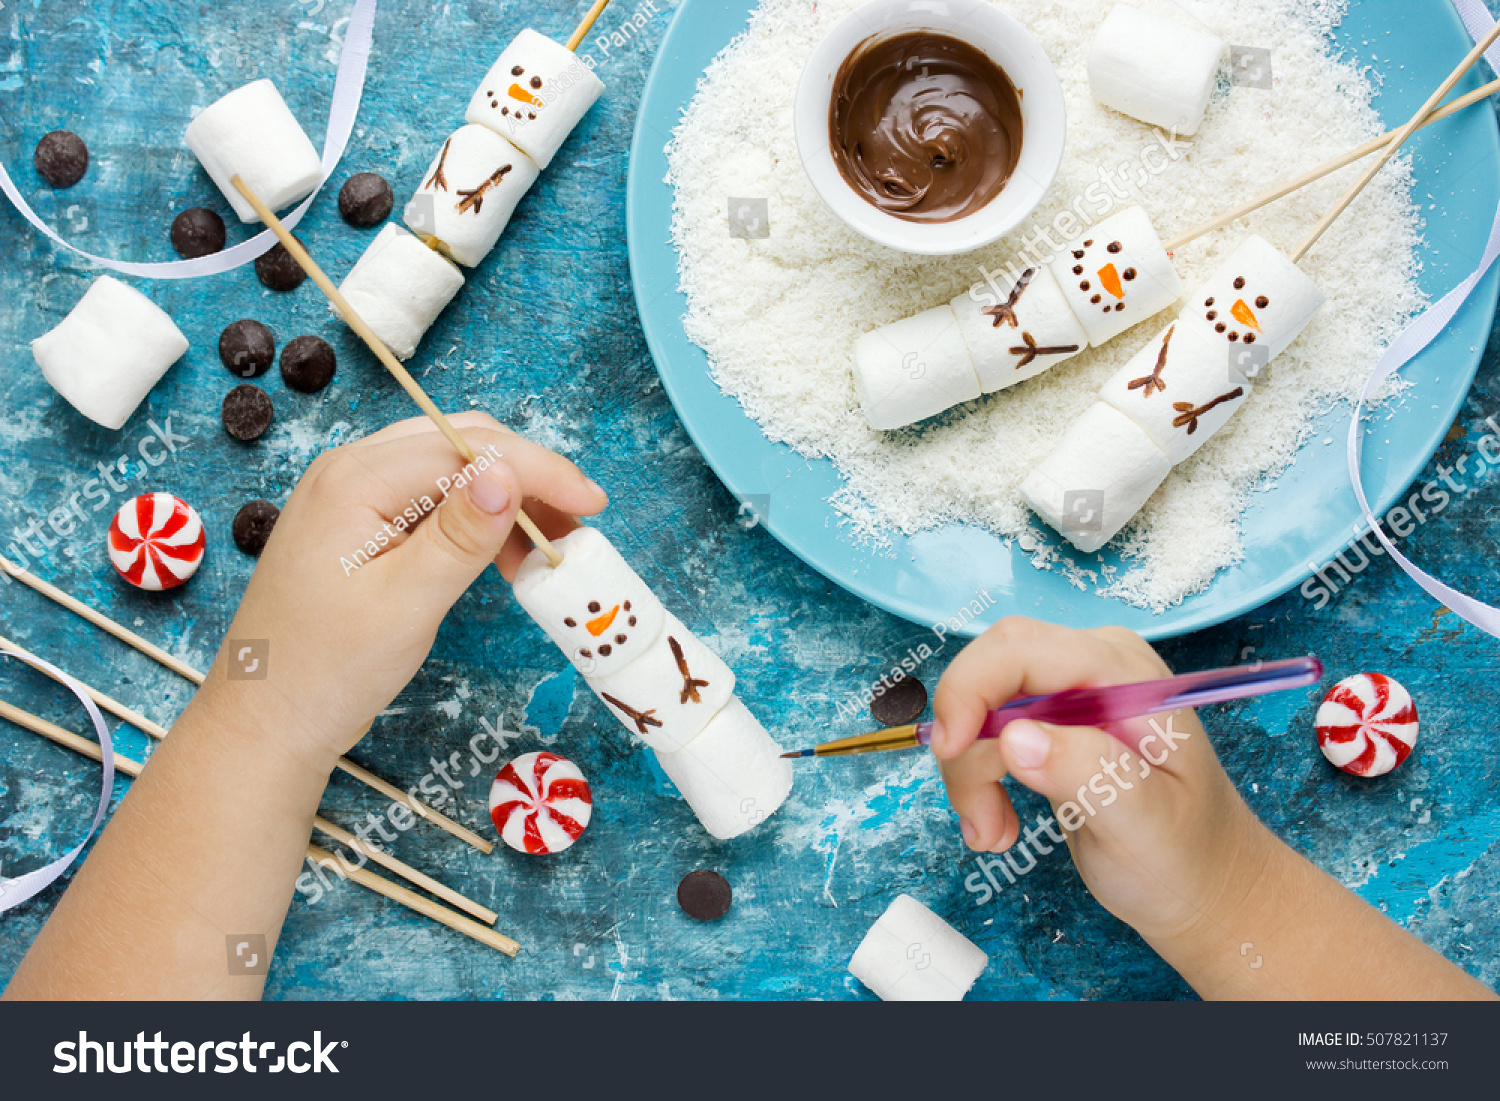 Child making snowman marshmallow pops, kitchen composition for winter holiday. Funny food art idea for Christmas dessert treat top view #507821137